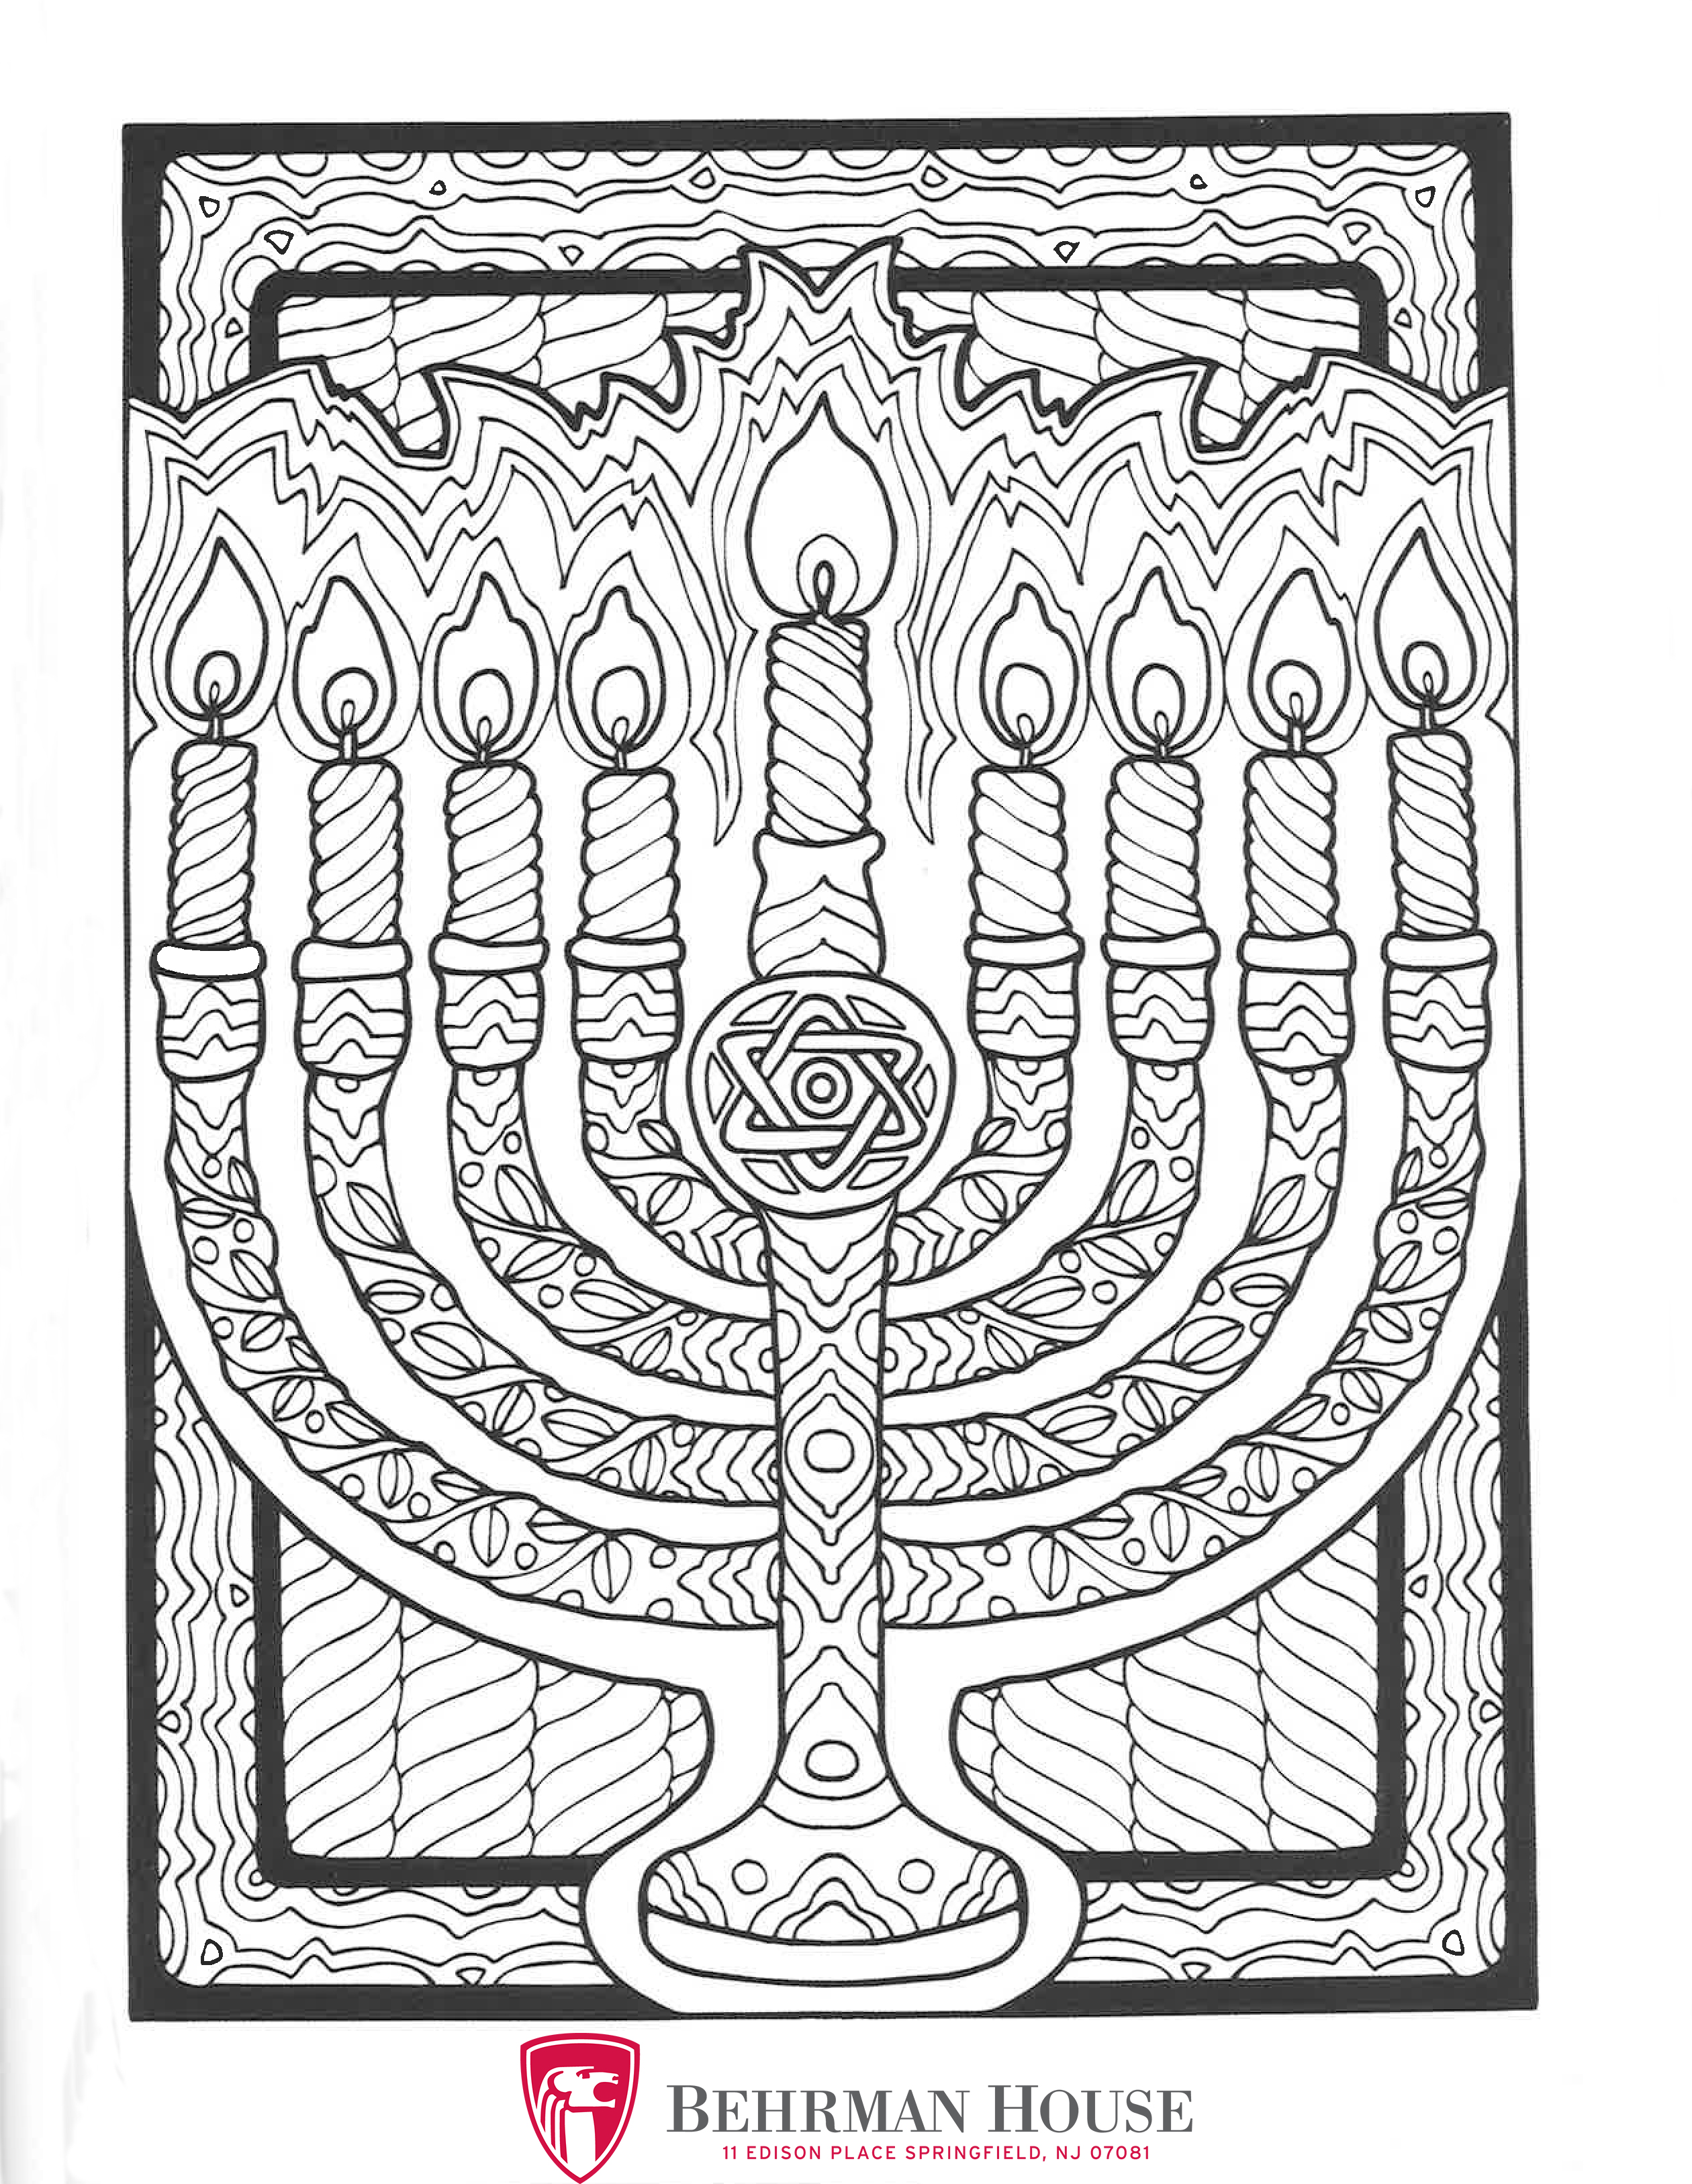 Free hanukkah resources for students educators and families behrman house publishing